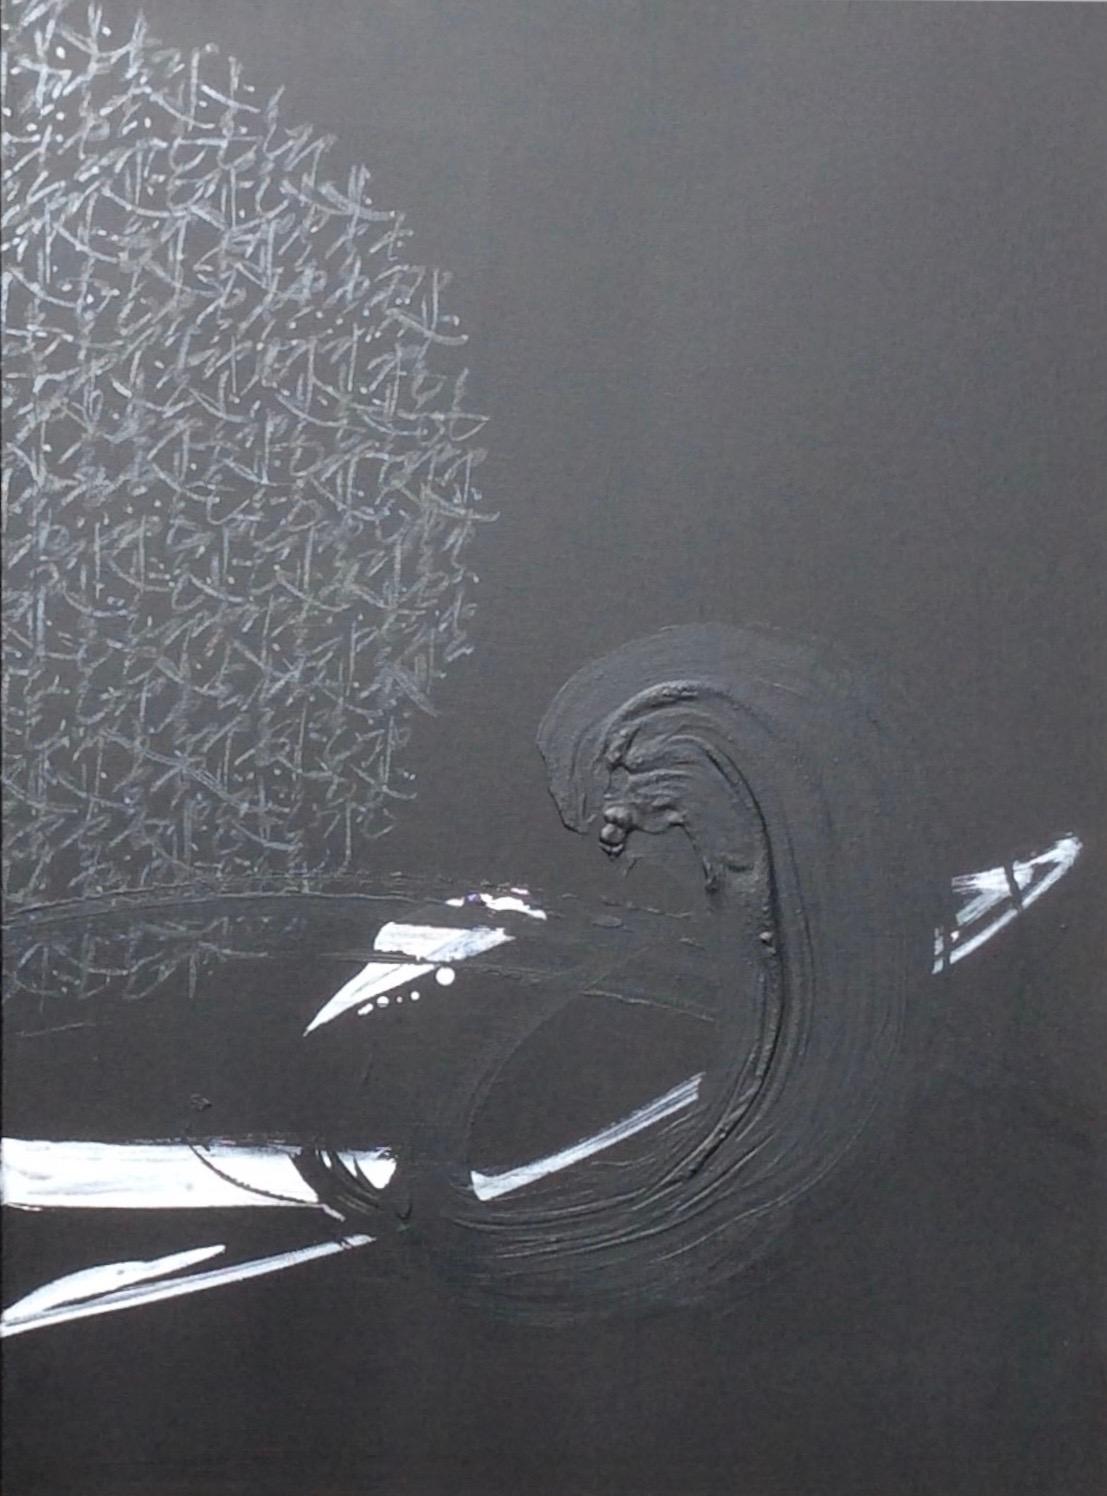 TN 683 D by Hachiro Kanno - Abstract painting, calligraphy-inspired, black For Sale 2